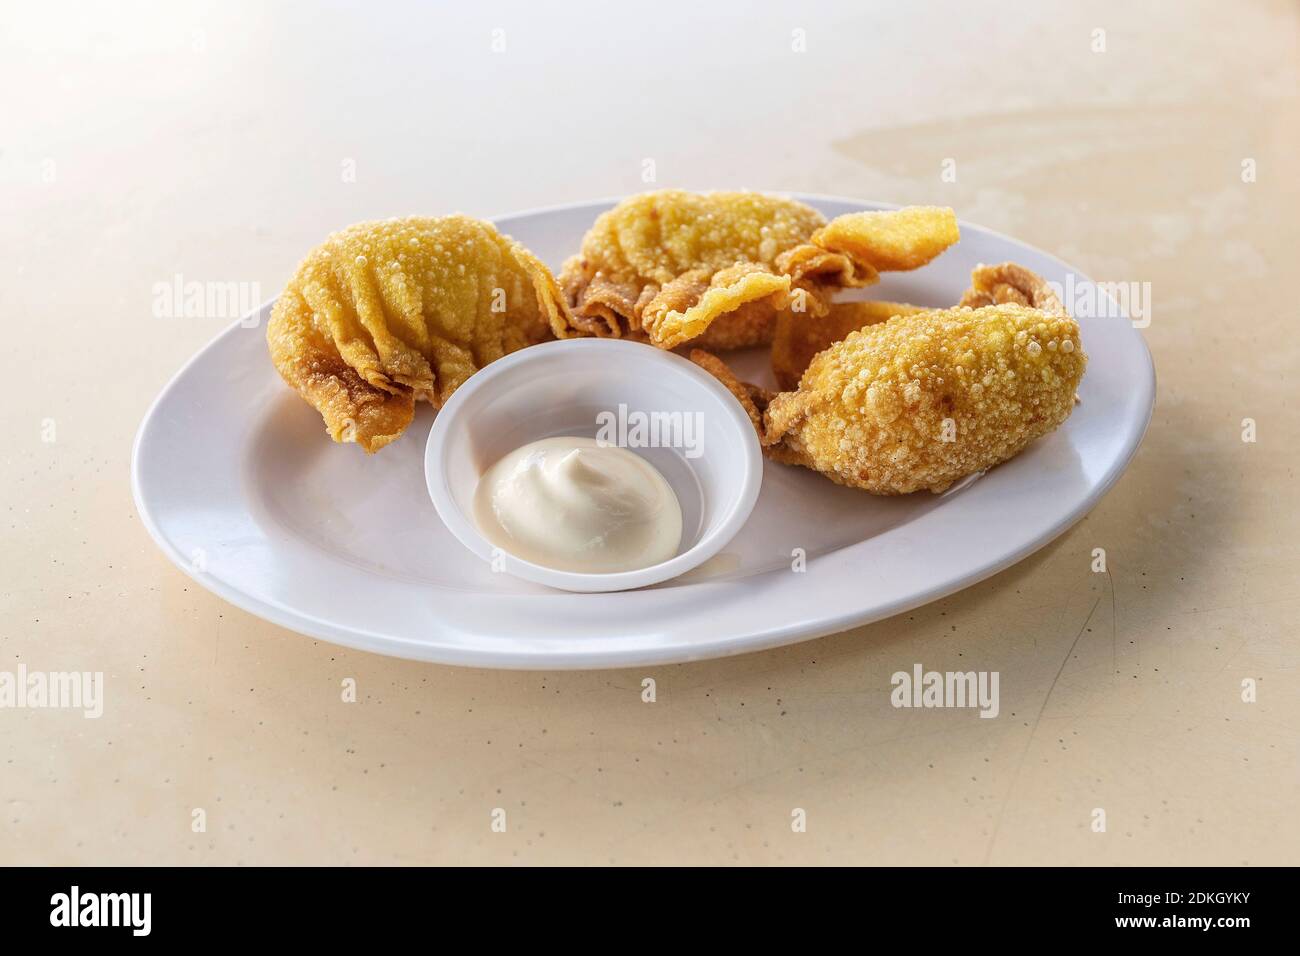 Close-up Of Food In Plate On Table Stock Photo